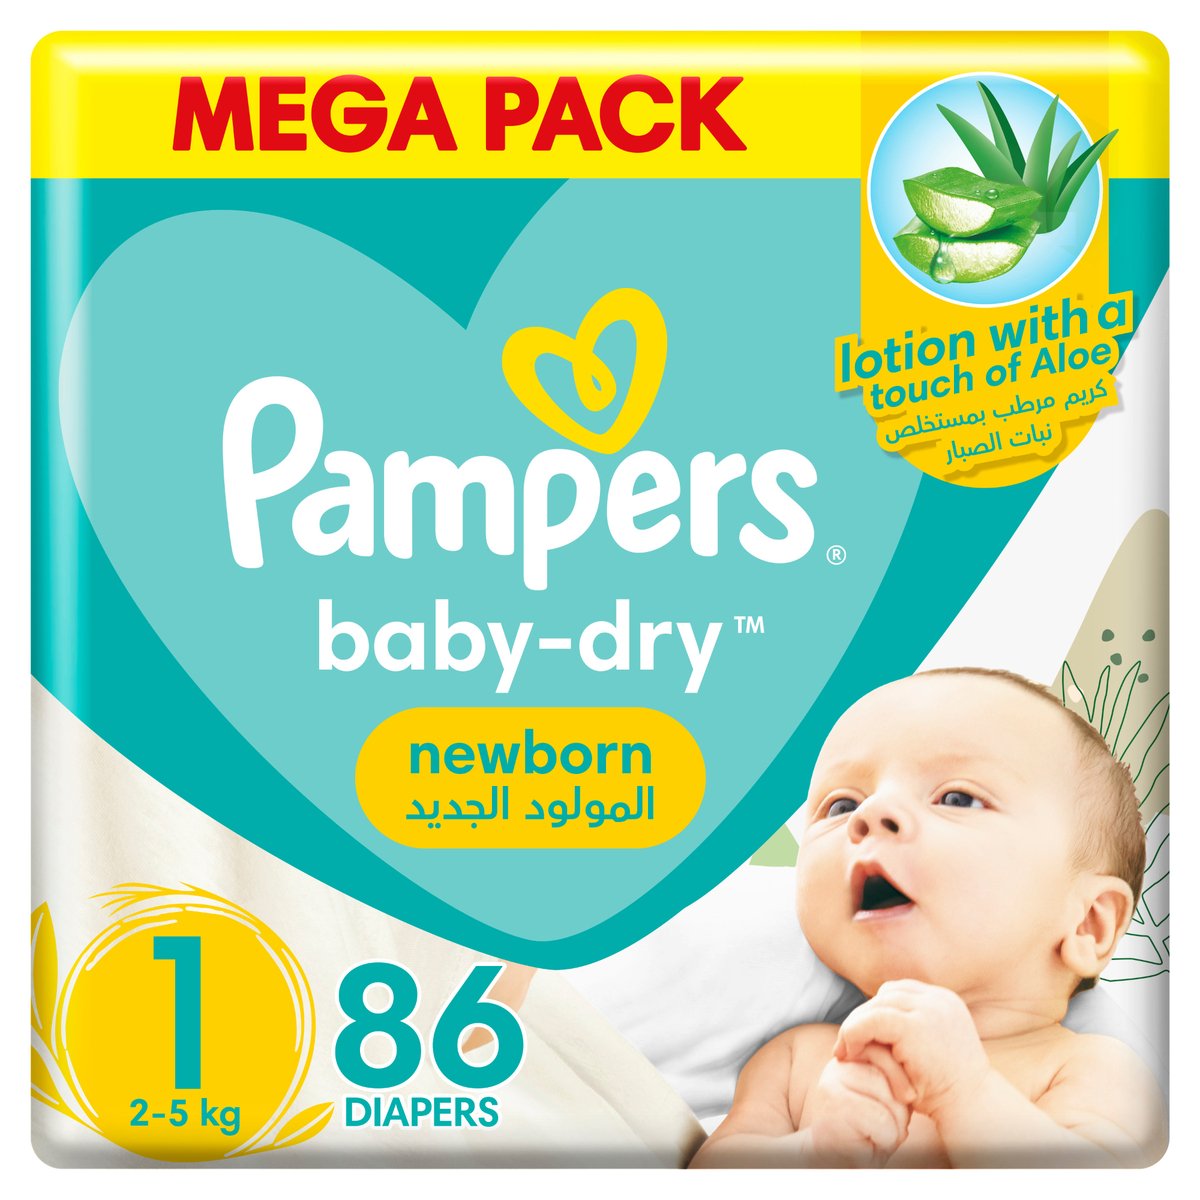 Buy Pampers Baby-Dry Newborn Taped Diapers with Aloe Vera Lotion, up to 100% Leakage Protection, Size 1, 2-5kg, Mega Pack, 86 pcs Online at Best Price | Baby Nappies | Lulu KSA in UAE